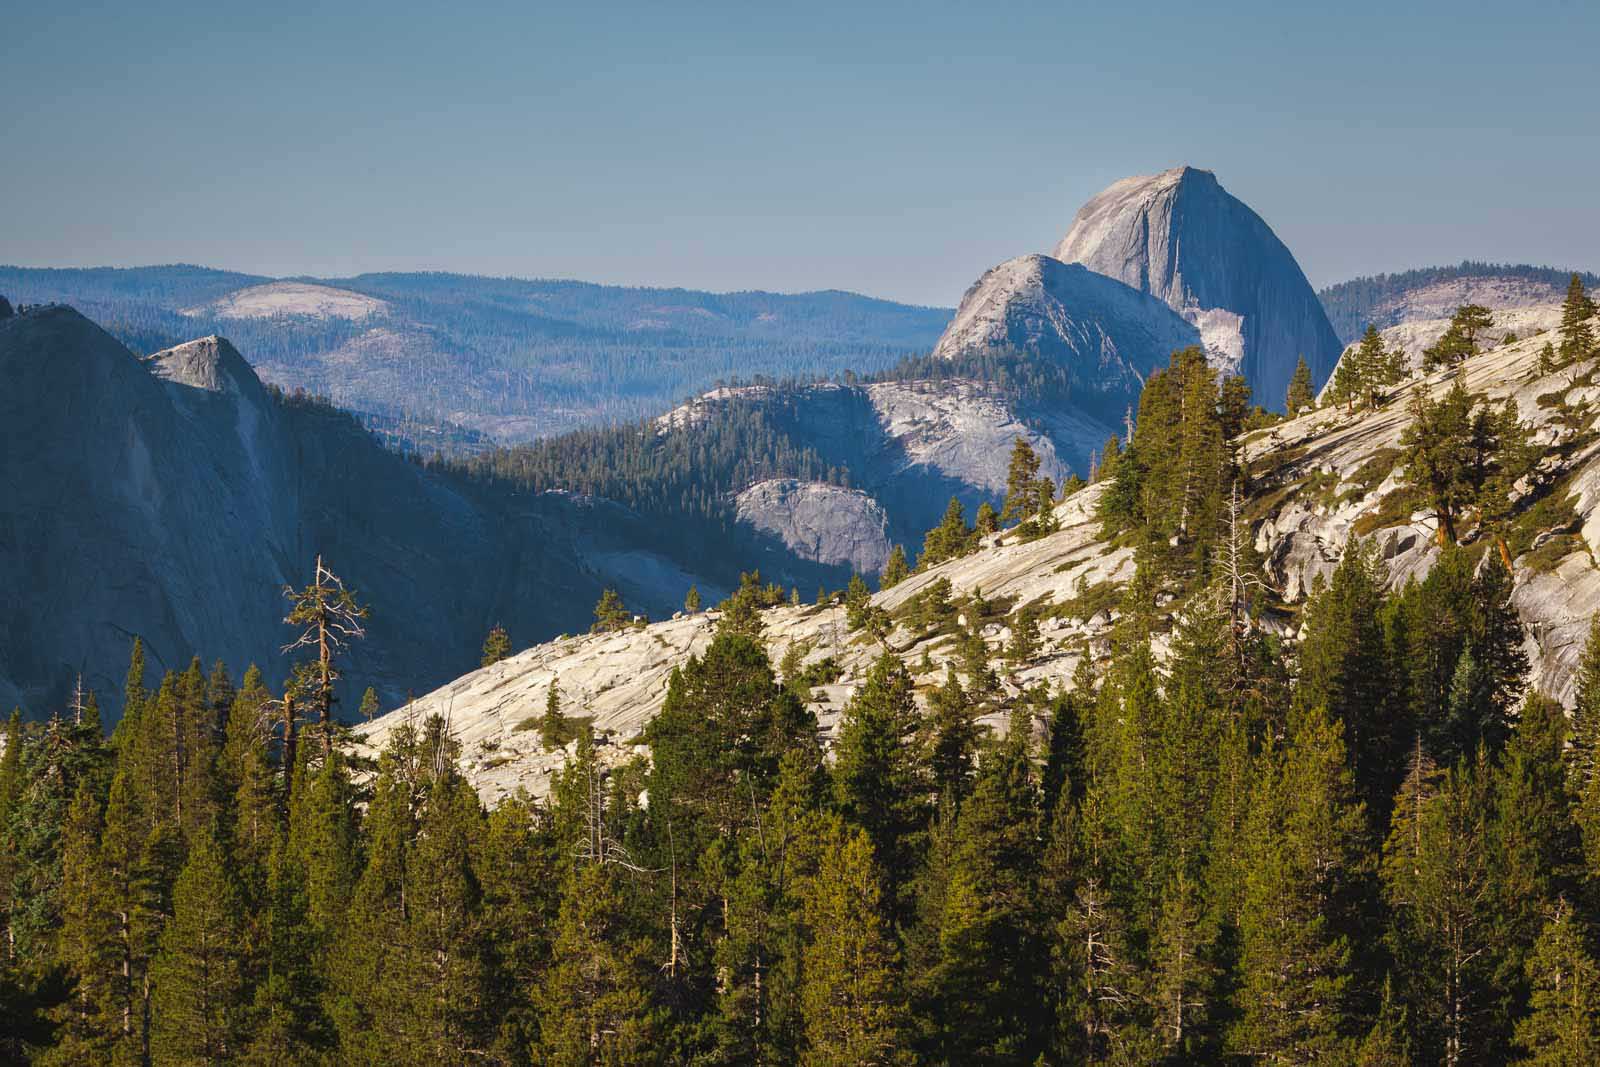 Things to do in yosemite national park - Sentinel Dome hike